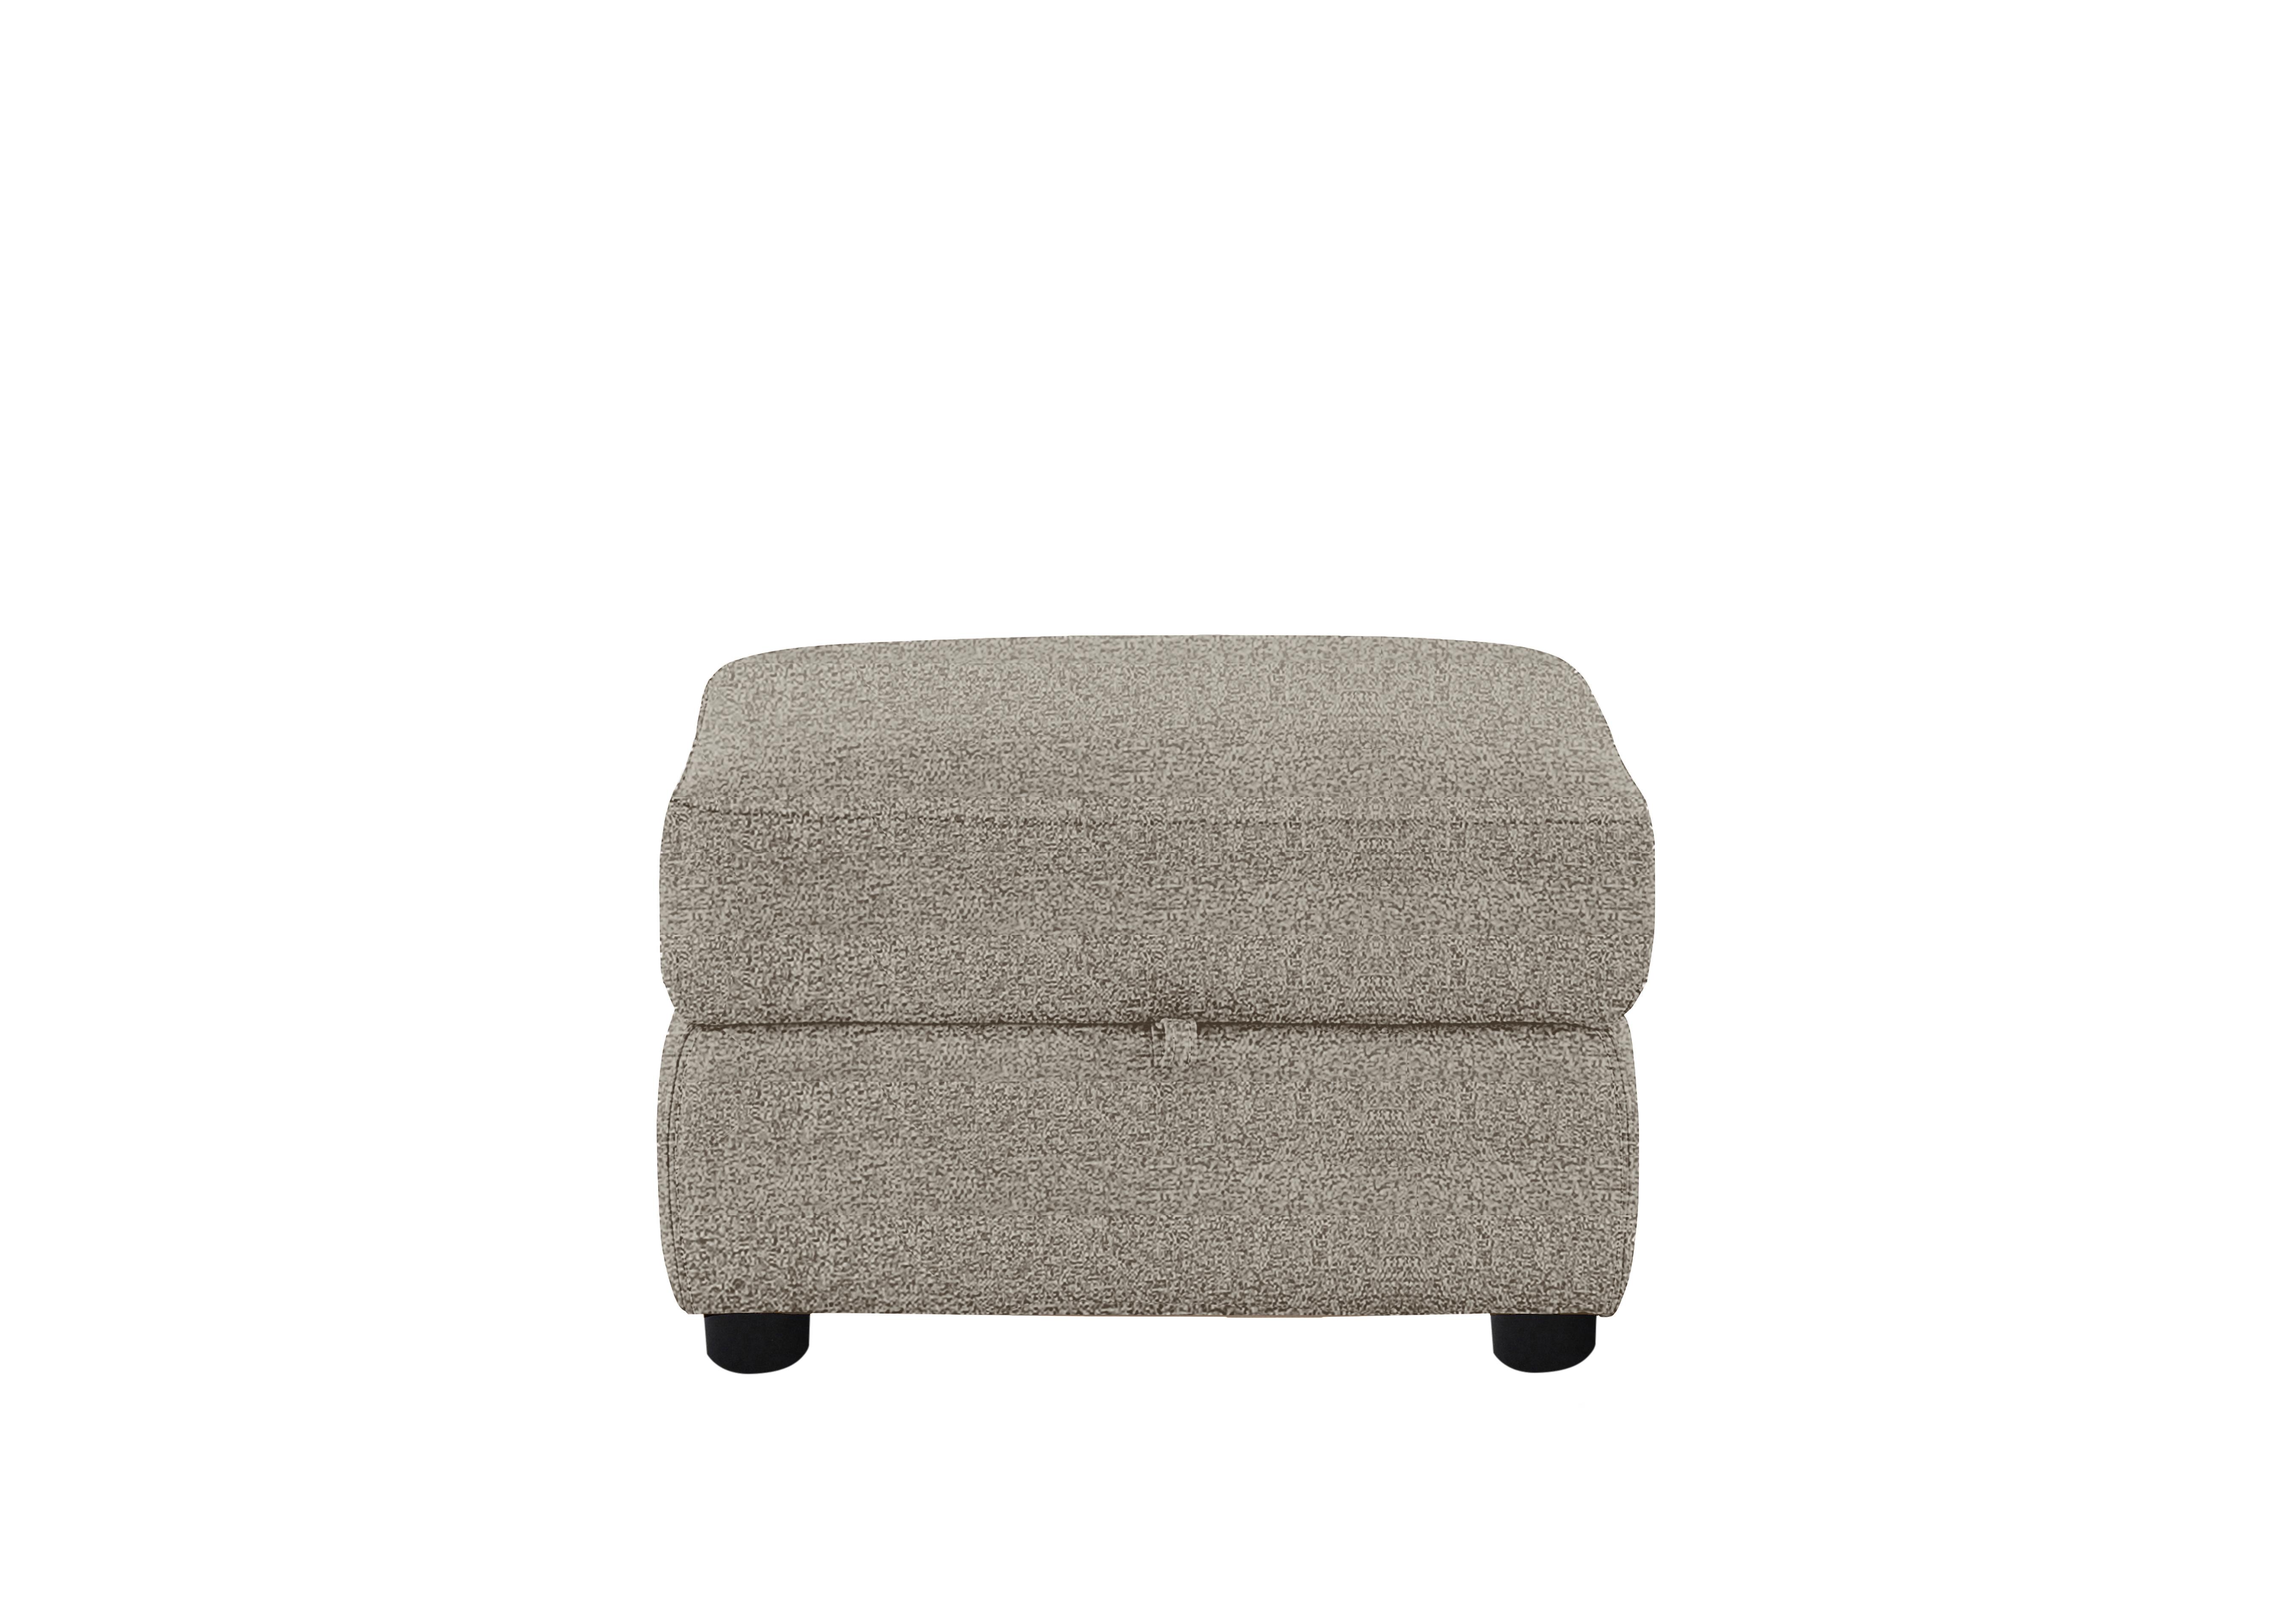 Snug Fabric Storage Footstool in Fab-Chl-R25 Biscuit on Furniture Village